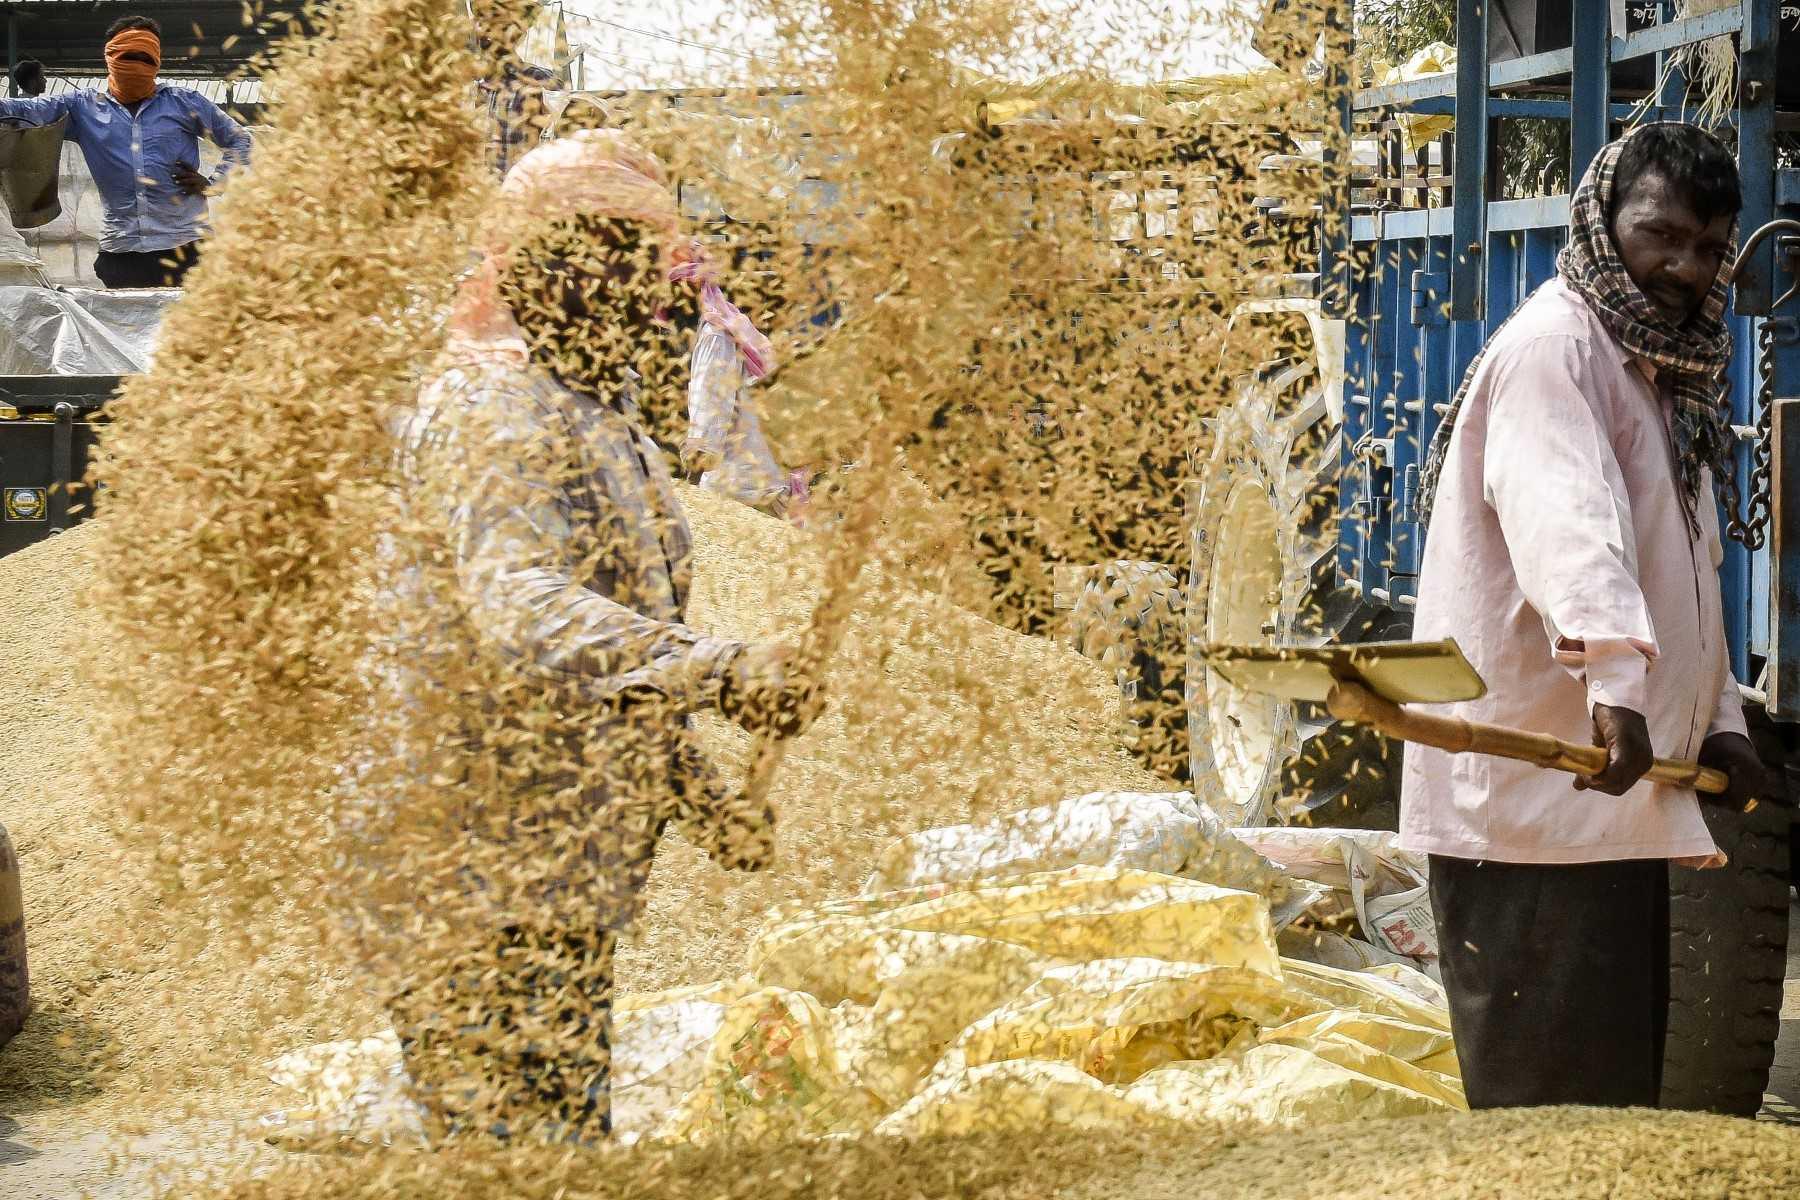 Labourers use shovels to separate rice husk from the grain at a wholesale grain market in Amritsar on Sept 20, 2022. Photo: AFP 